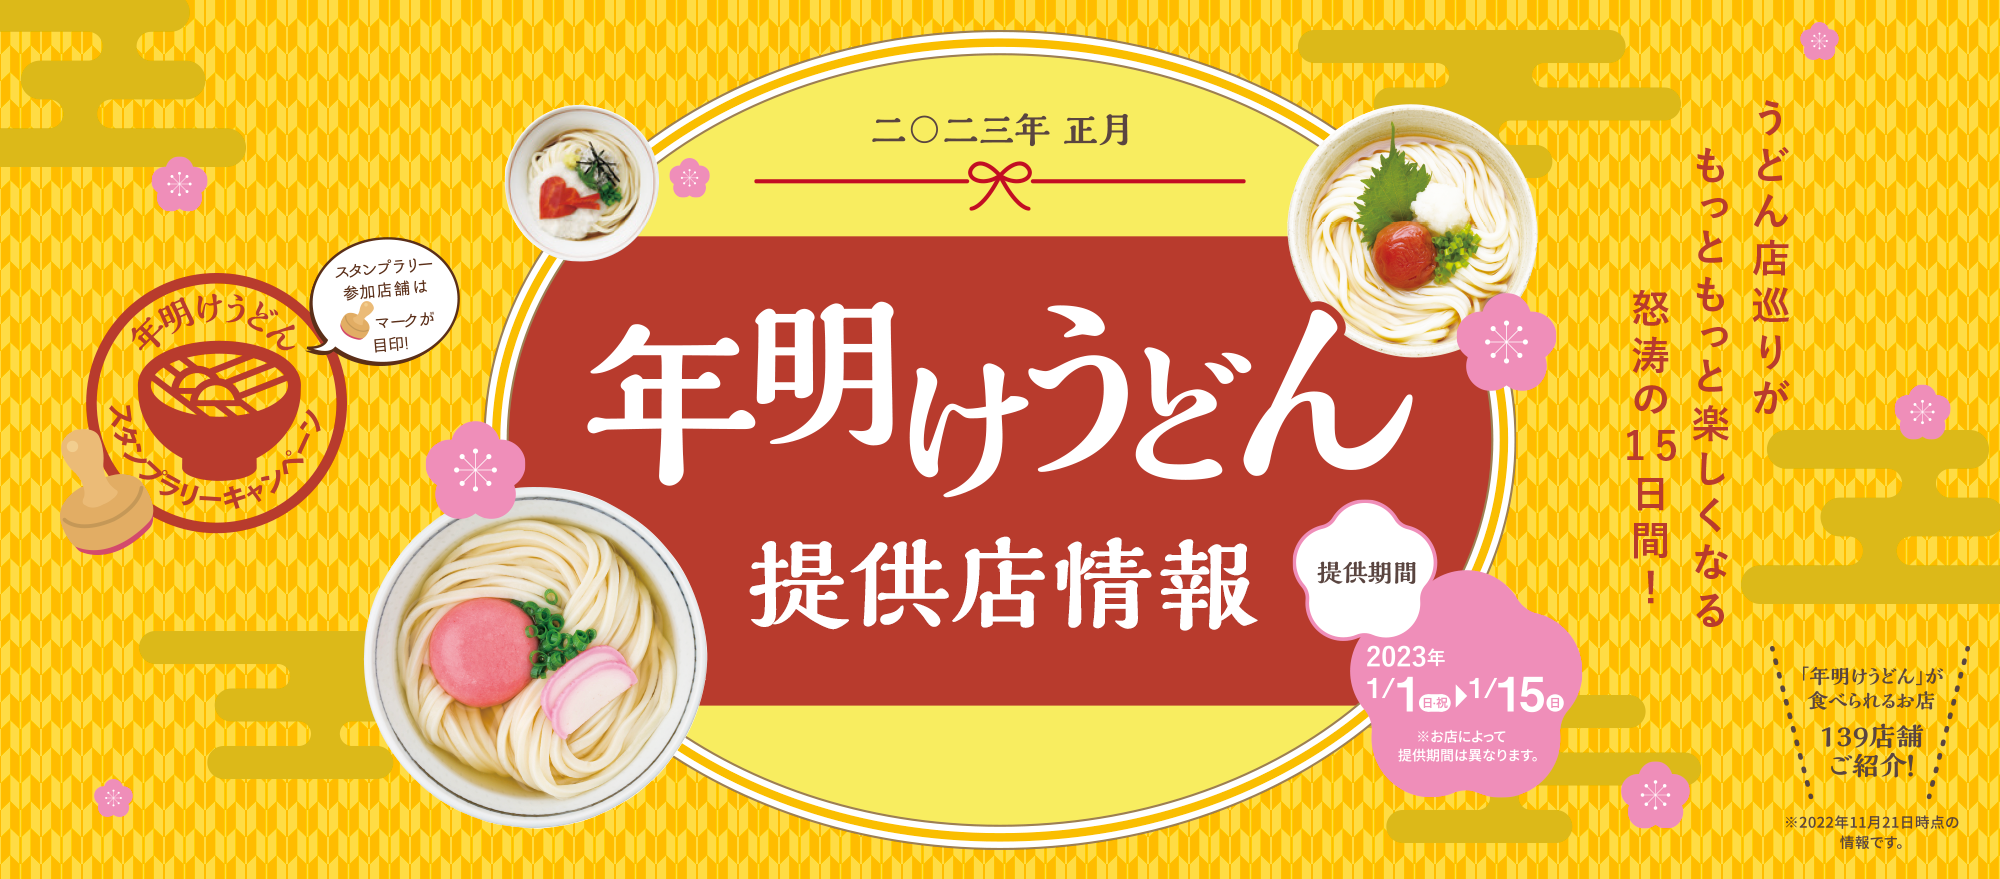 "New Year Udon" offer store information